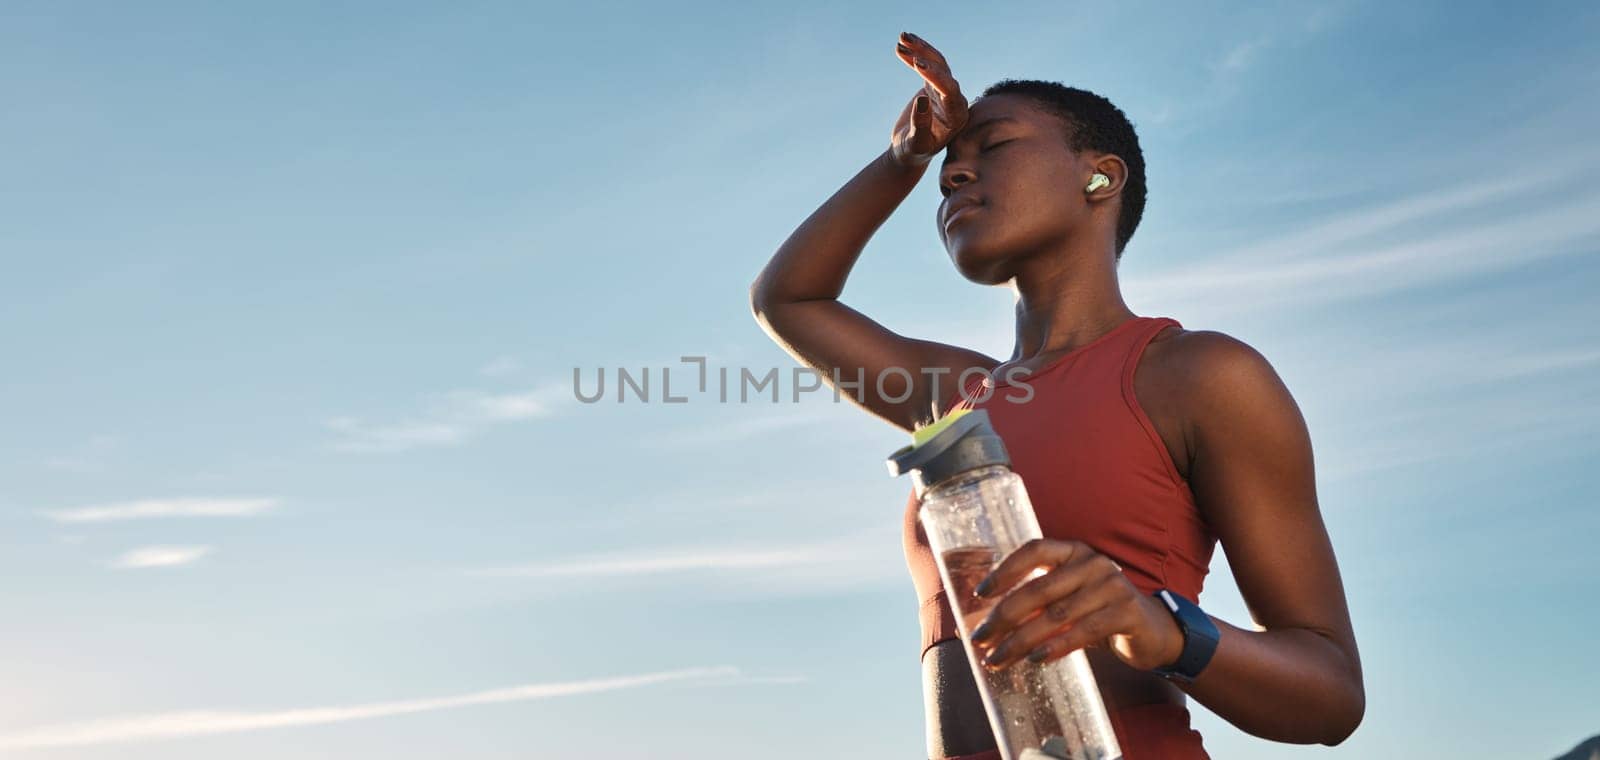 Water bottle, tired and black woman on break after running, exercise or cardio workout with low angle and mock up. Sports, fitness and sweating female holding liquid for hydration after training